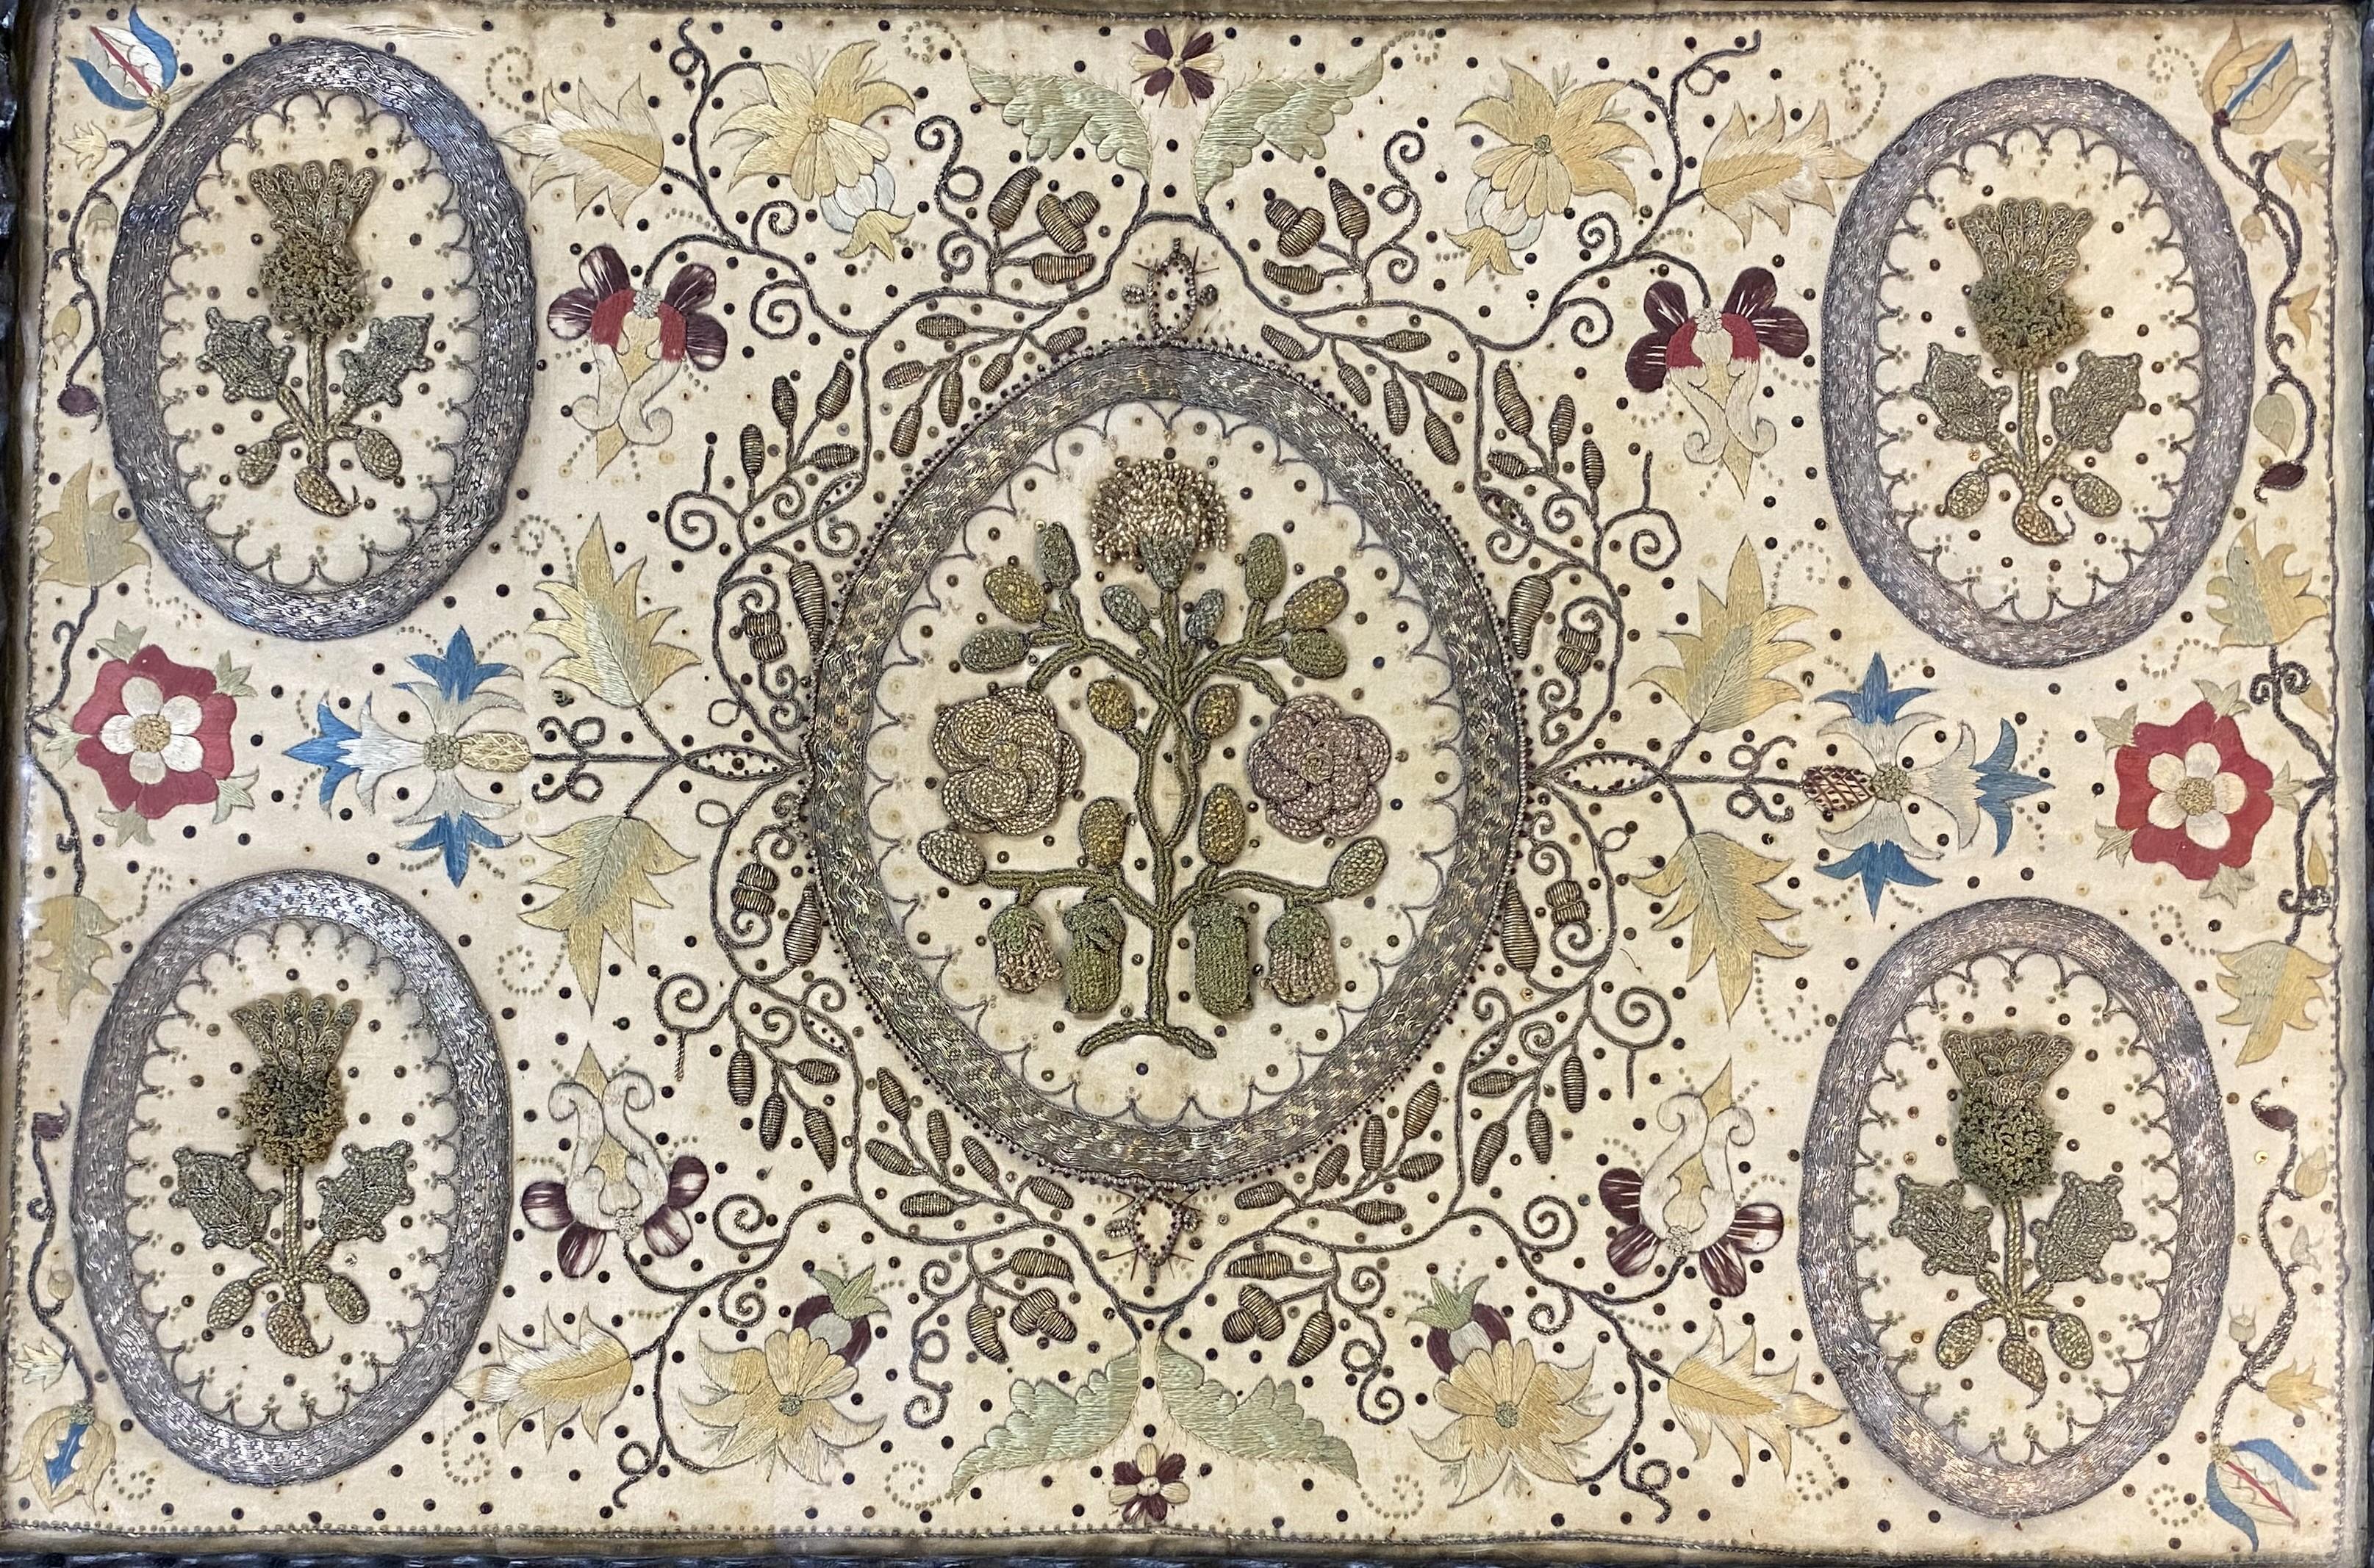 A wonderful example of Mary Stuart (Mary, Queen of Scots) hand wrought commemorative embroidery with a central foliate cartouche surrounded by four smaller ones, each with metallic thread and accented with colorful foliate background silk and metal